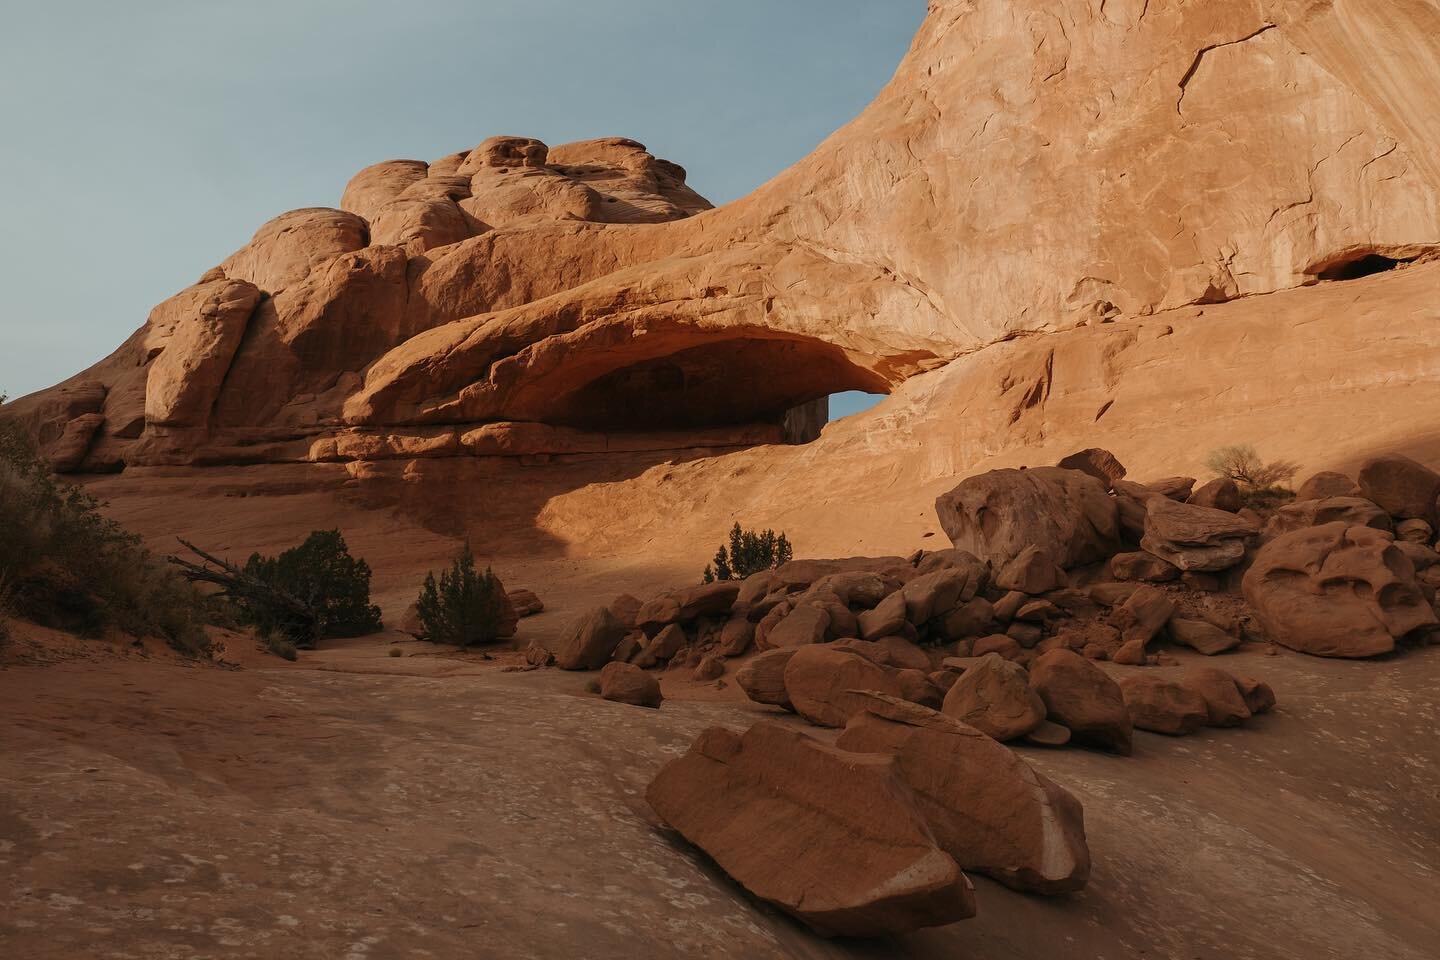 Utah has A LOT of arches. I can&rsquo;t tell you what this one is called, or where it is, or even give you an idea of how to find it - but I think it&rsquo;s pretty neat.